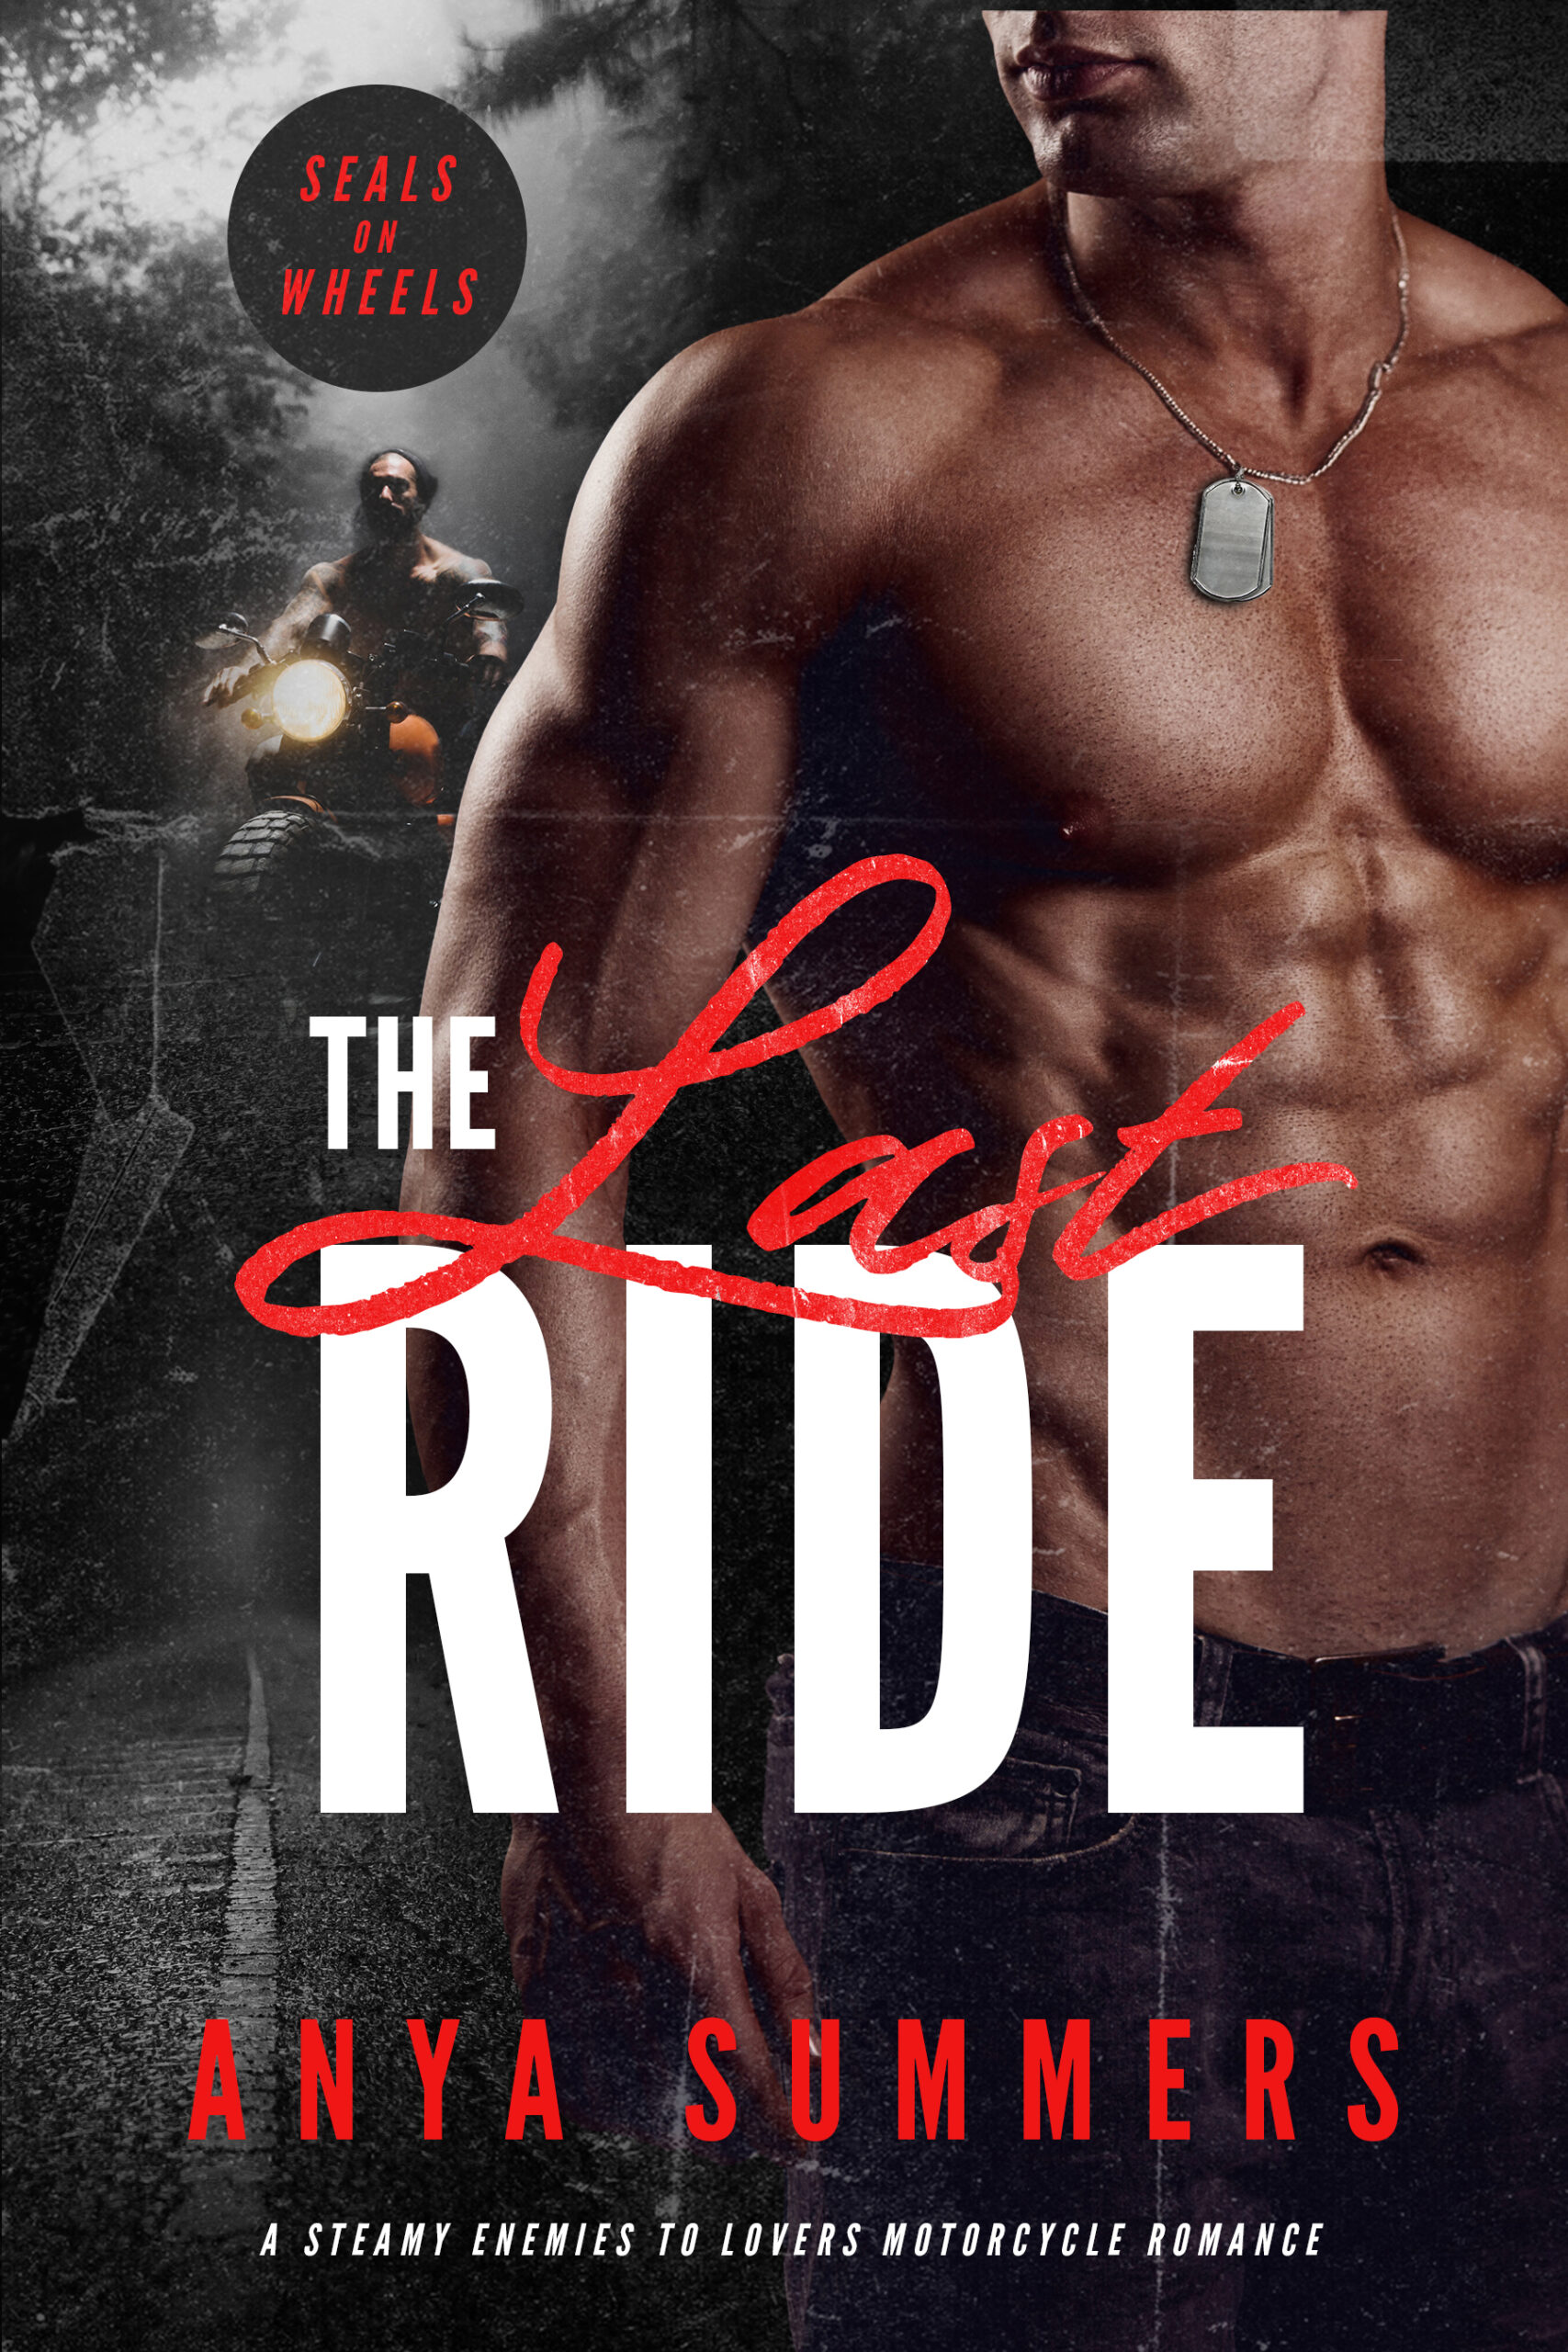 Book Blitz: The Last Ride by Anya Summers